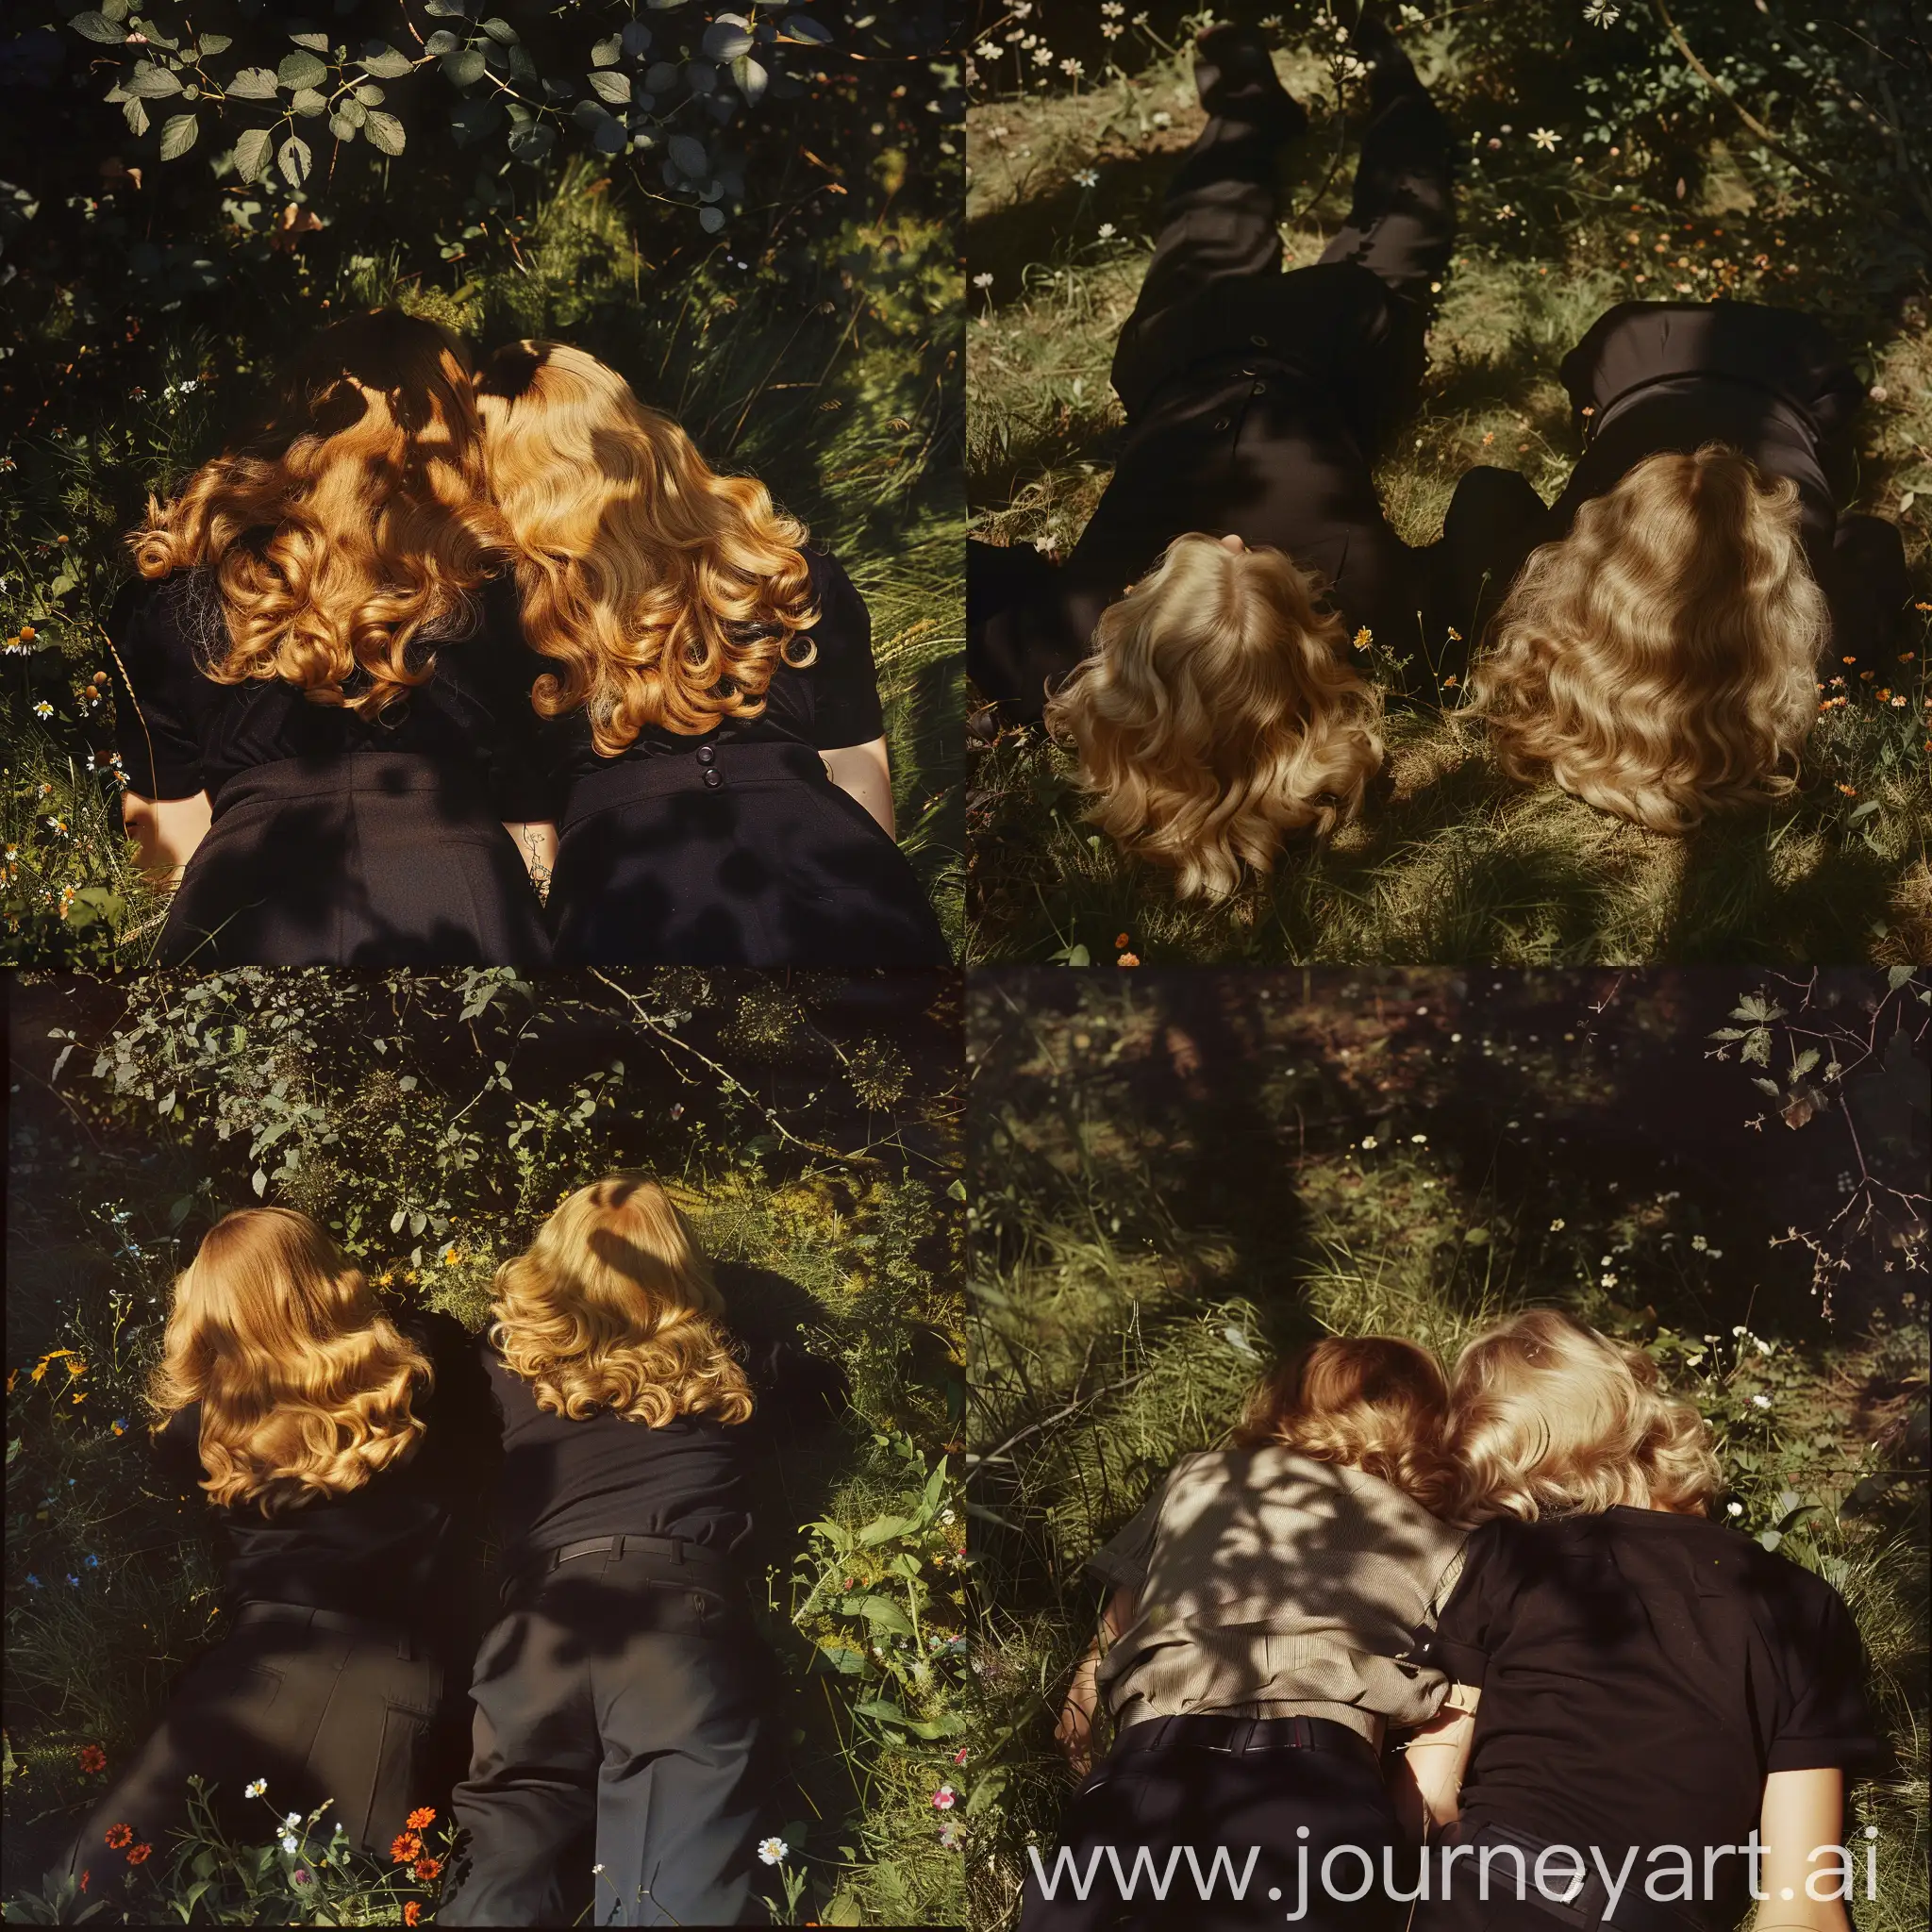 Retro shot from the 1970s, realism, high quality details. A real film shot. Close-up of two fat 16-year-old girls lying on the grass, rear view. Blonde hair. The shadows from the trees and the rays of the sun fall everywhere creating an interesting atmosphere, wildflowers. Black business trousers and a T-shirt.